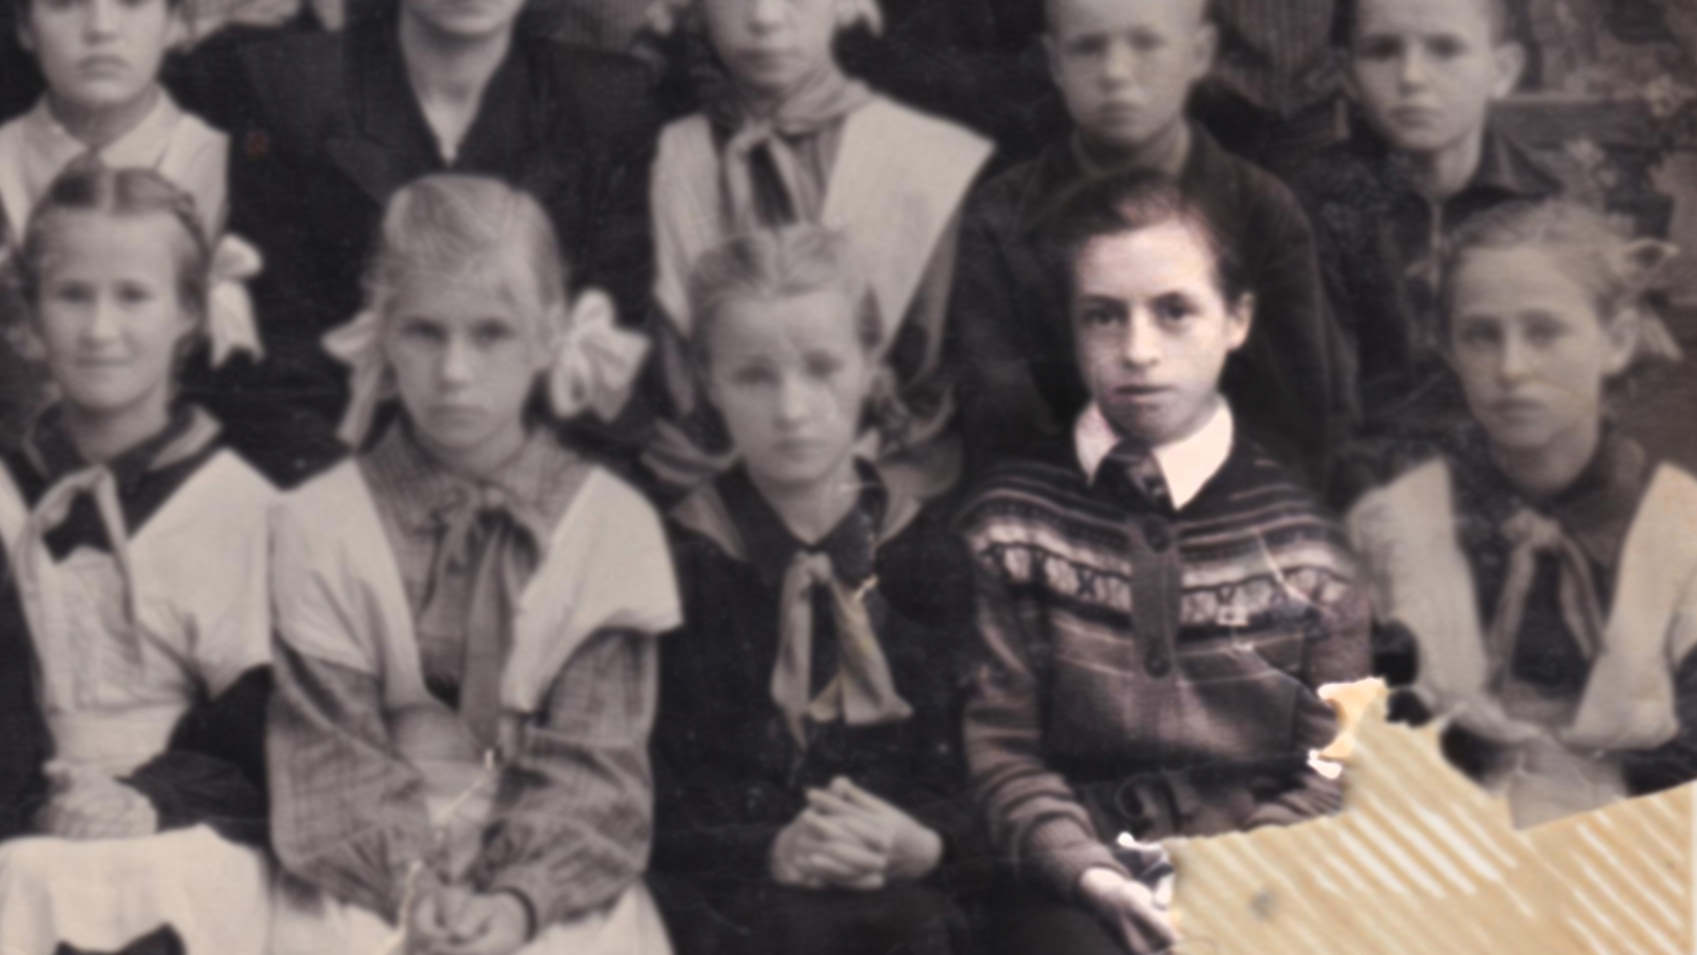 Ida Kvartovskaya, age 14 (bottom row, second from right), in 1954. When her family fled from the Nazi invasion they lost all their possessions including family photos.